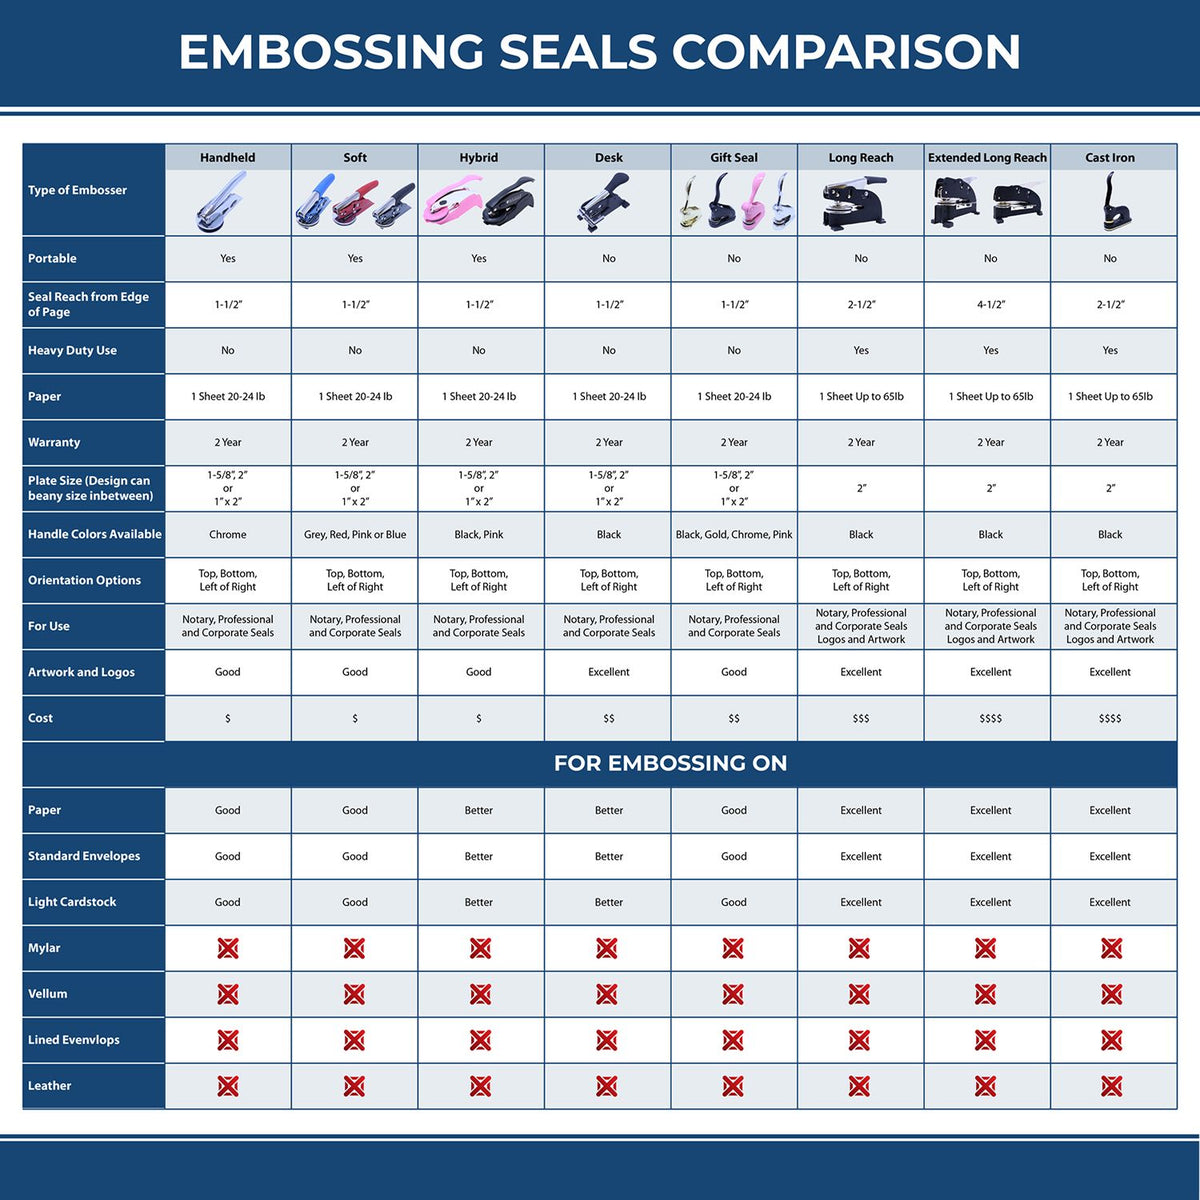 A comparison chart for the different types of mount models available for the Hybrid Nevada Geologist Seal